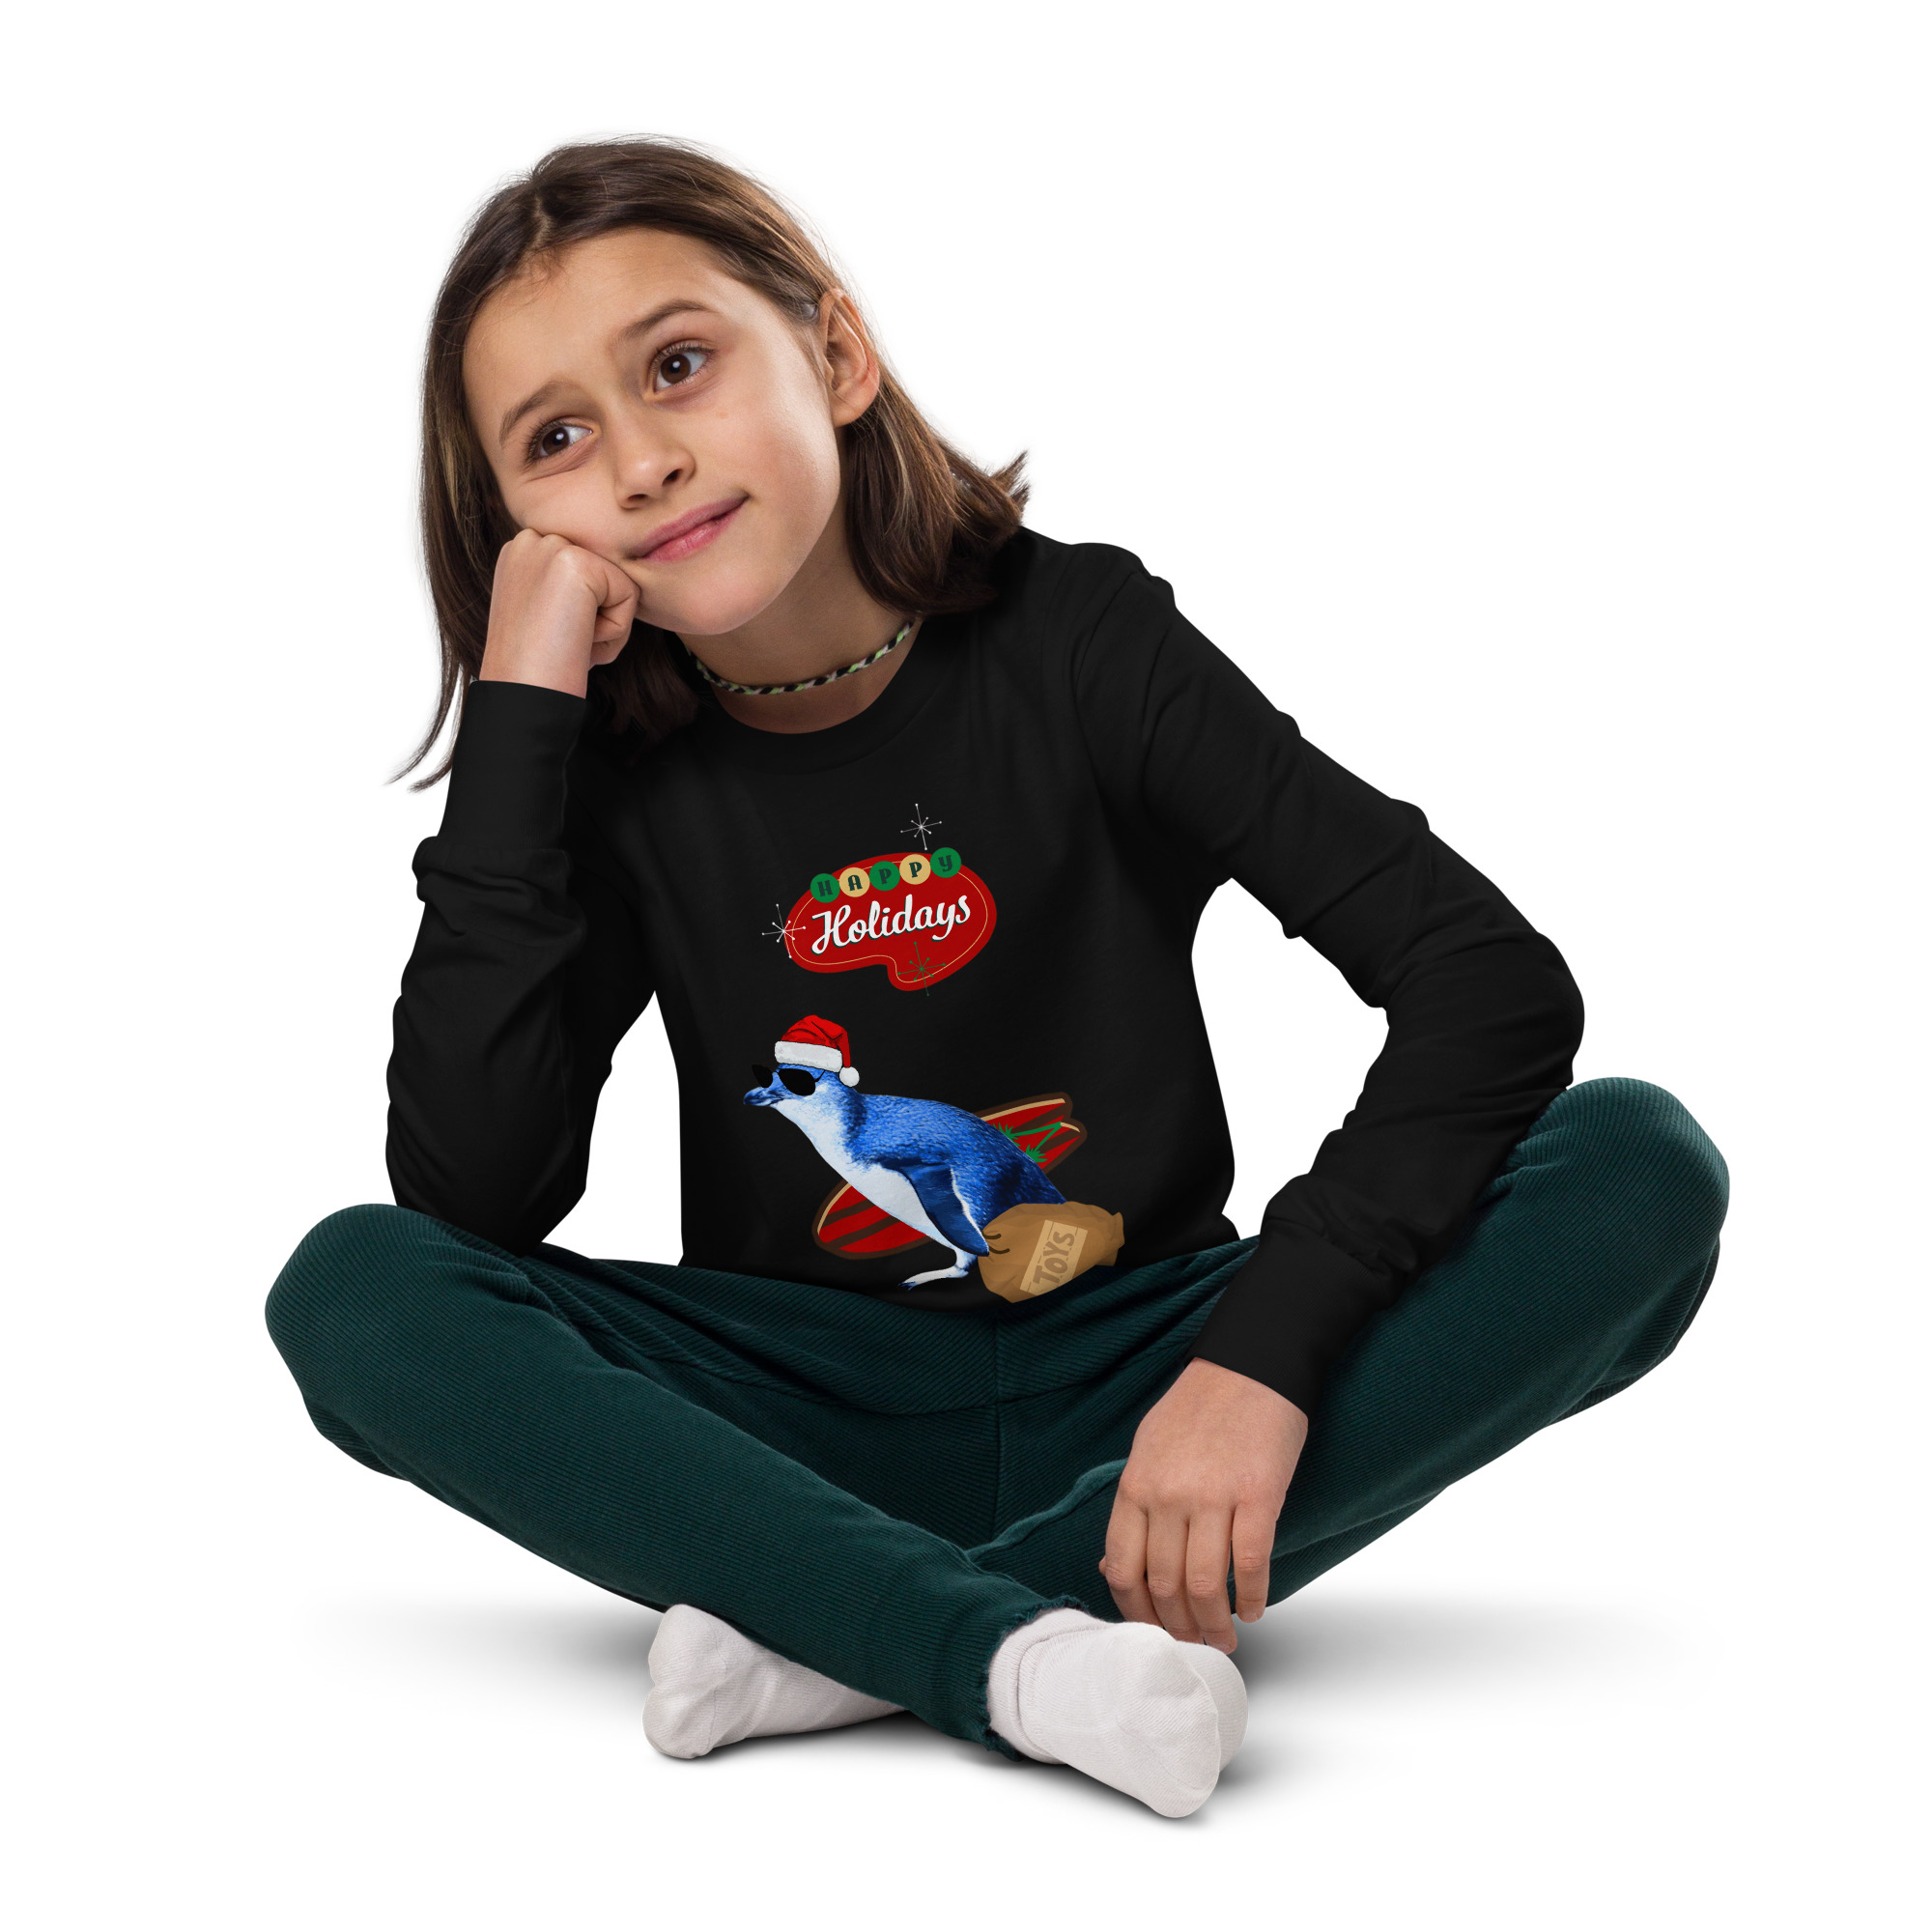 Holiday LBP Youth long sleeve tee